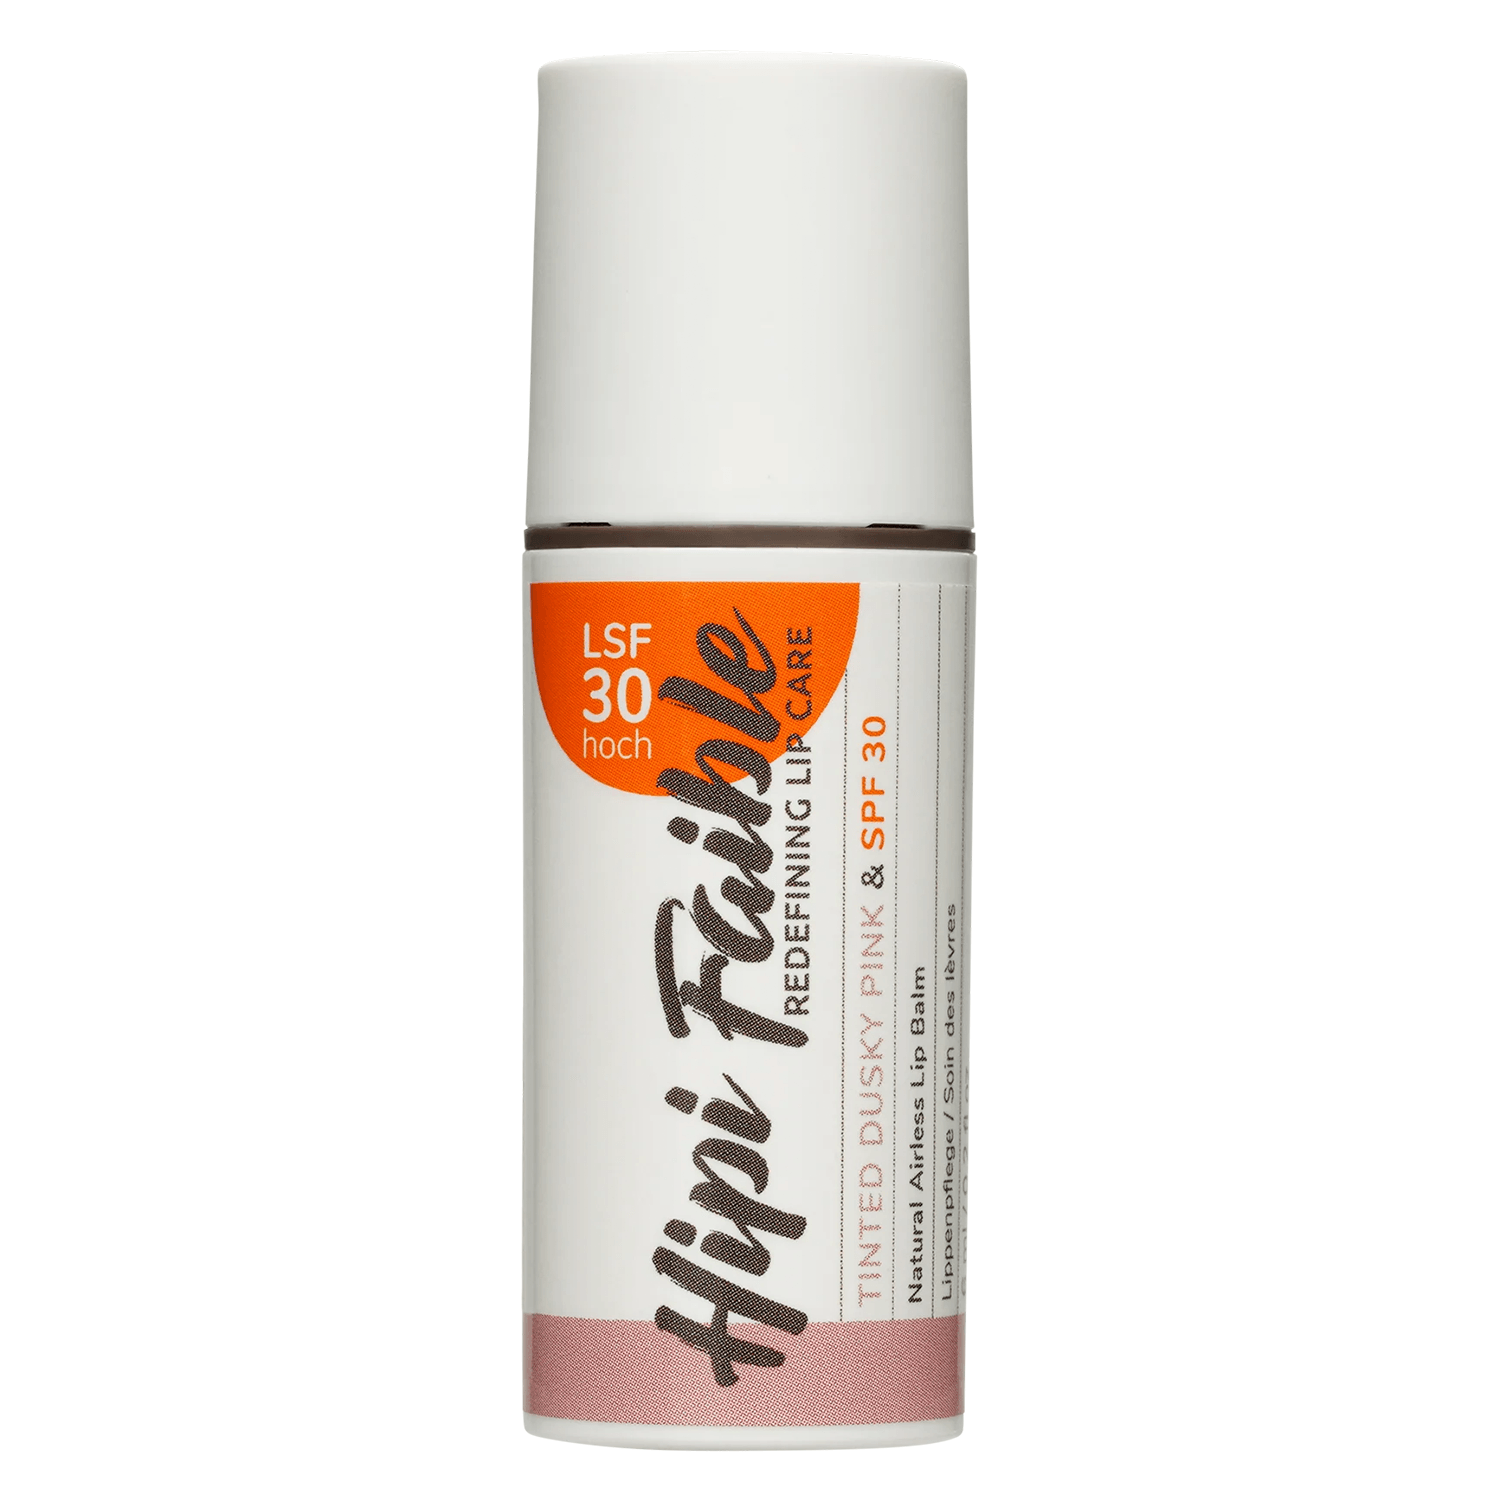 Product image from Hipi Faible - Lip Balm Tinted Dusky Pink & SPF 30